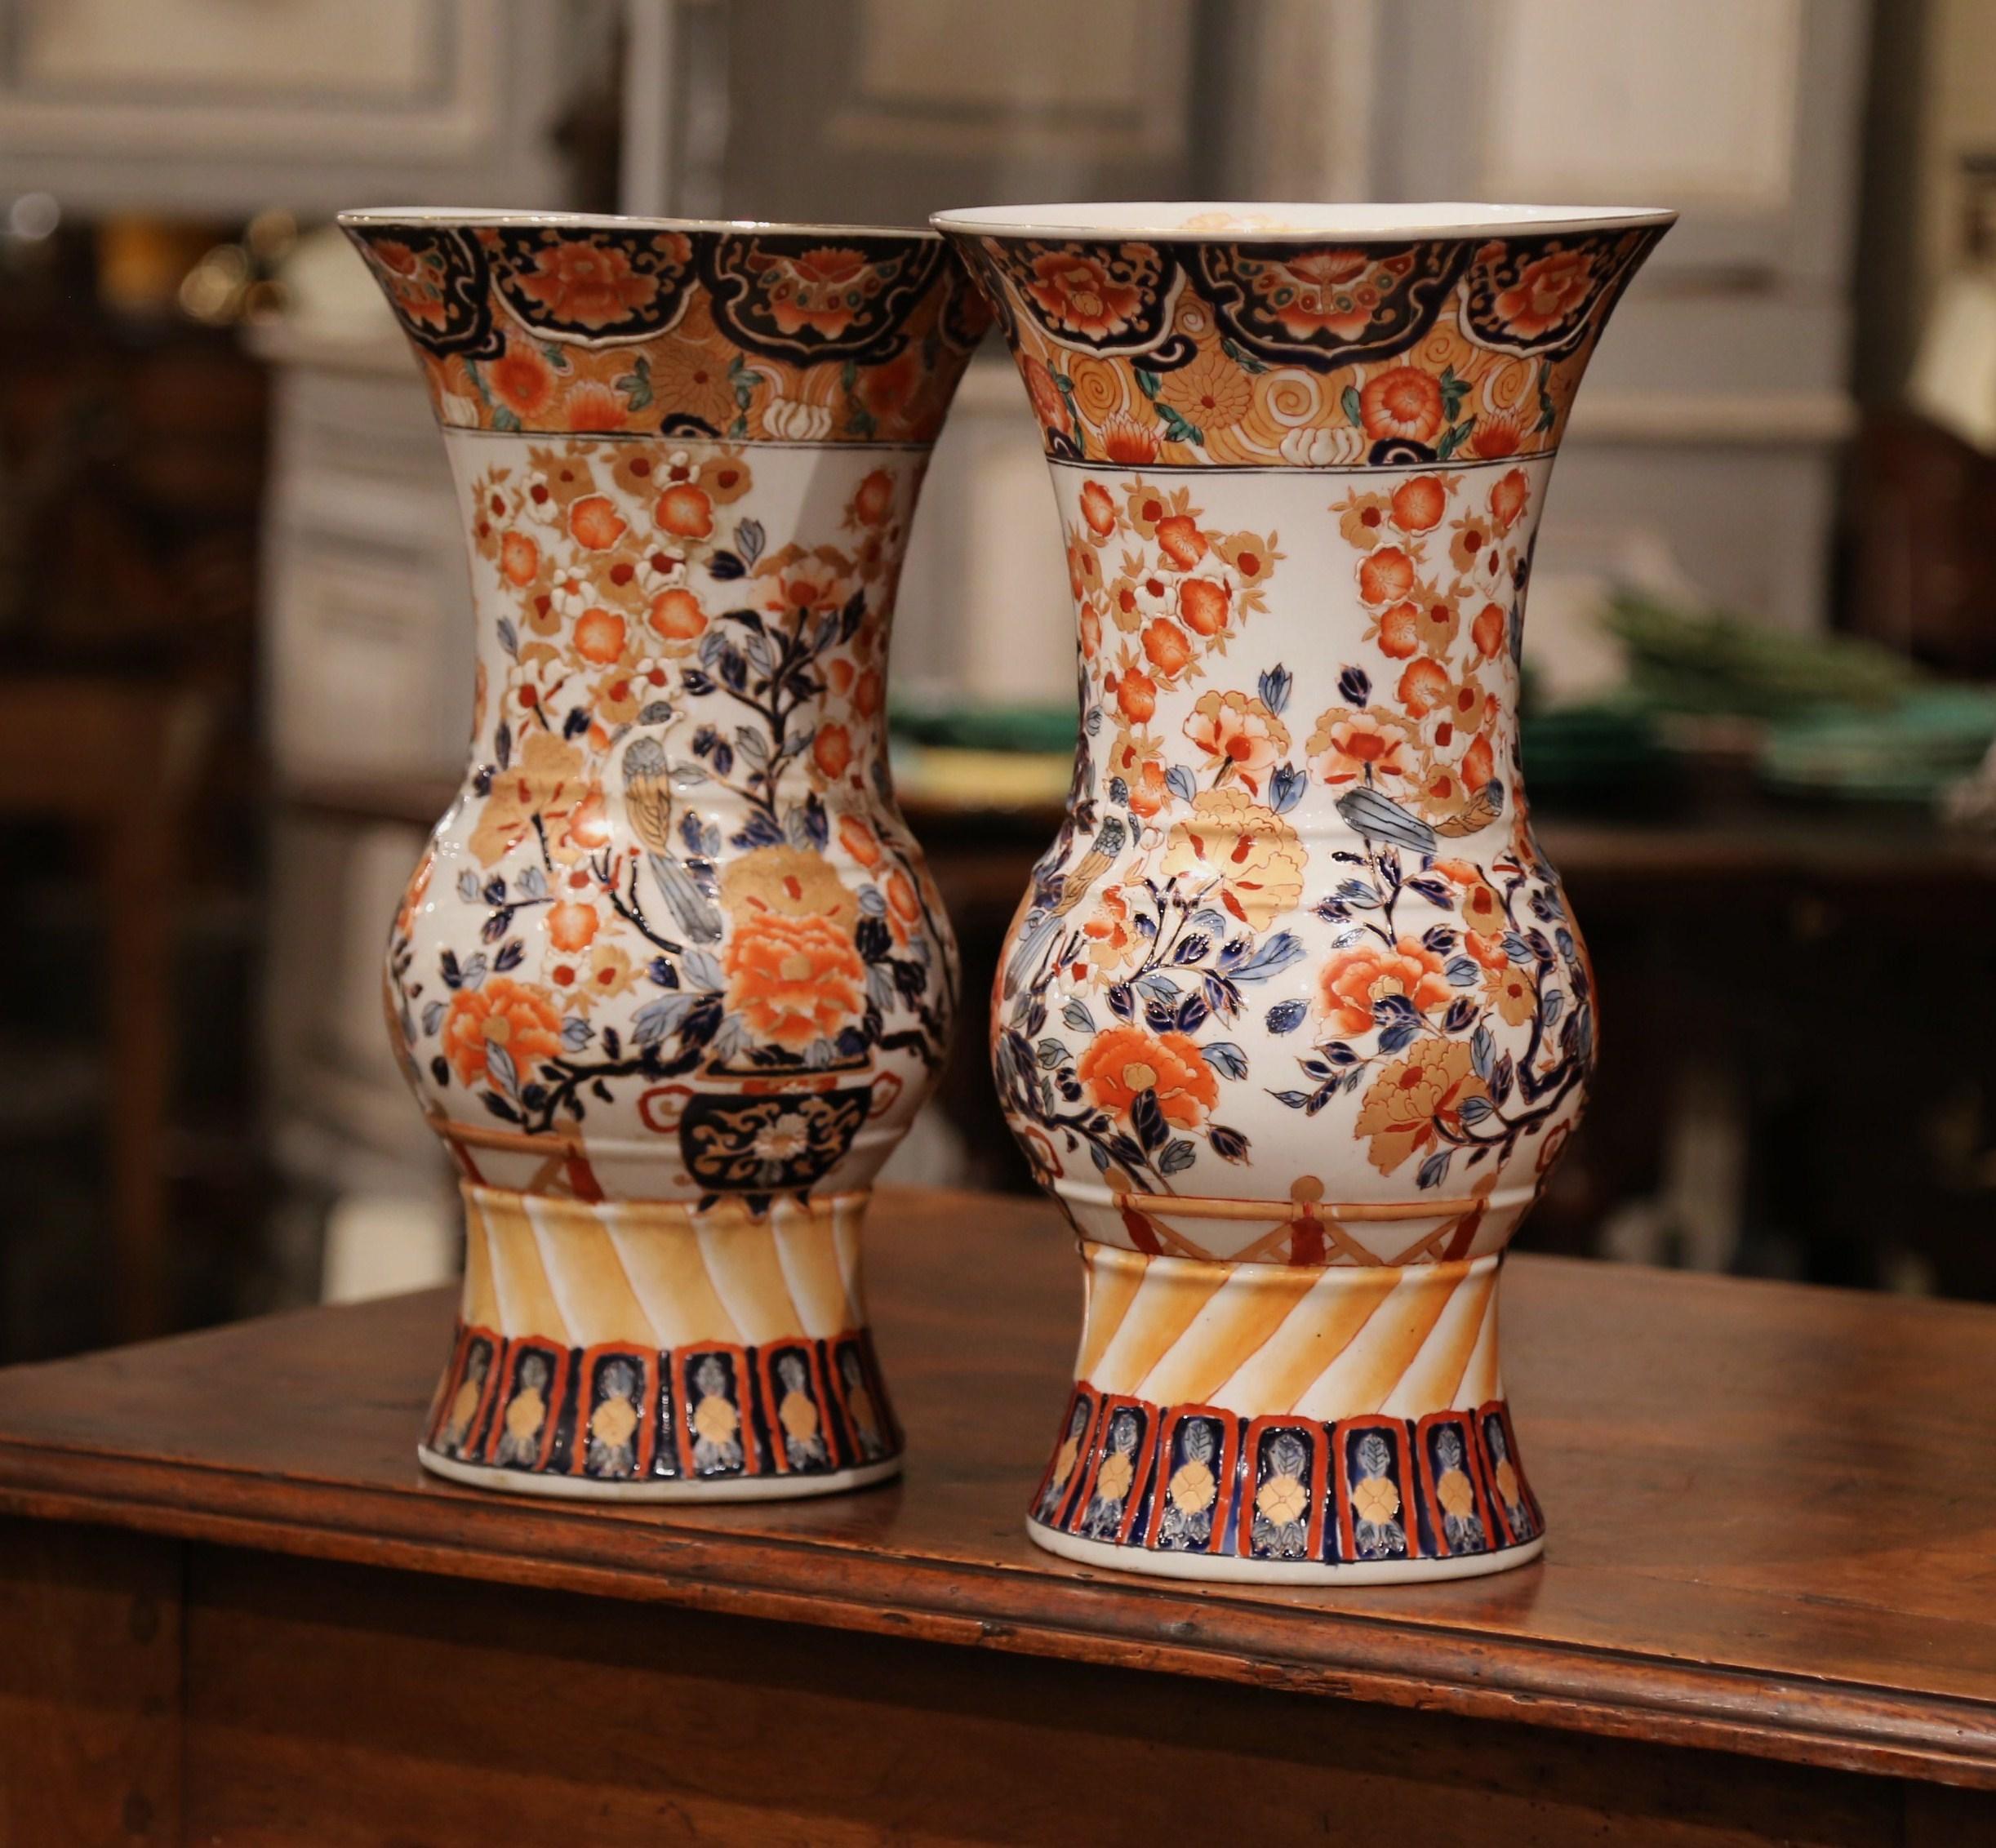 These tall antique porcelain Imari vases were created in Japan circa 1920. Each ceramic vessel has a wide mouth at the top, a rounded body, an elevated base, and hand painted with exotic, Asian bird and floral decor in delicate blue and pastel